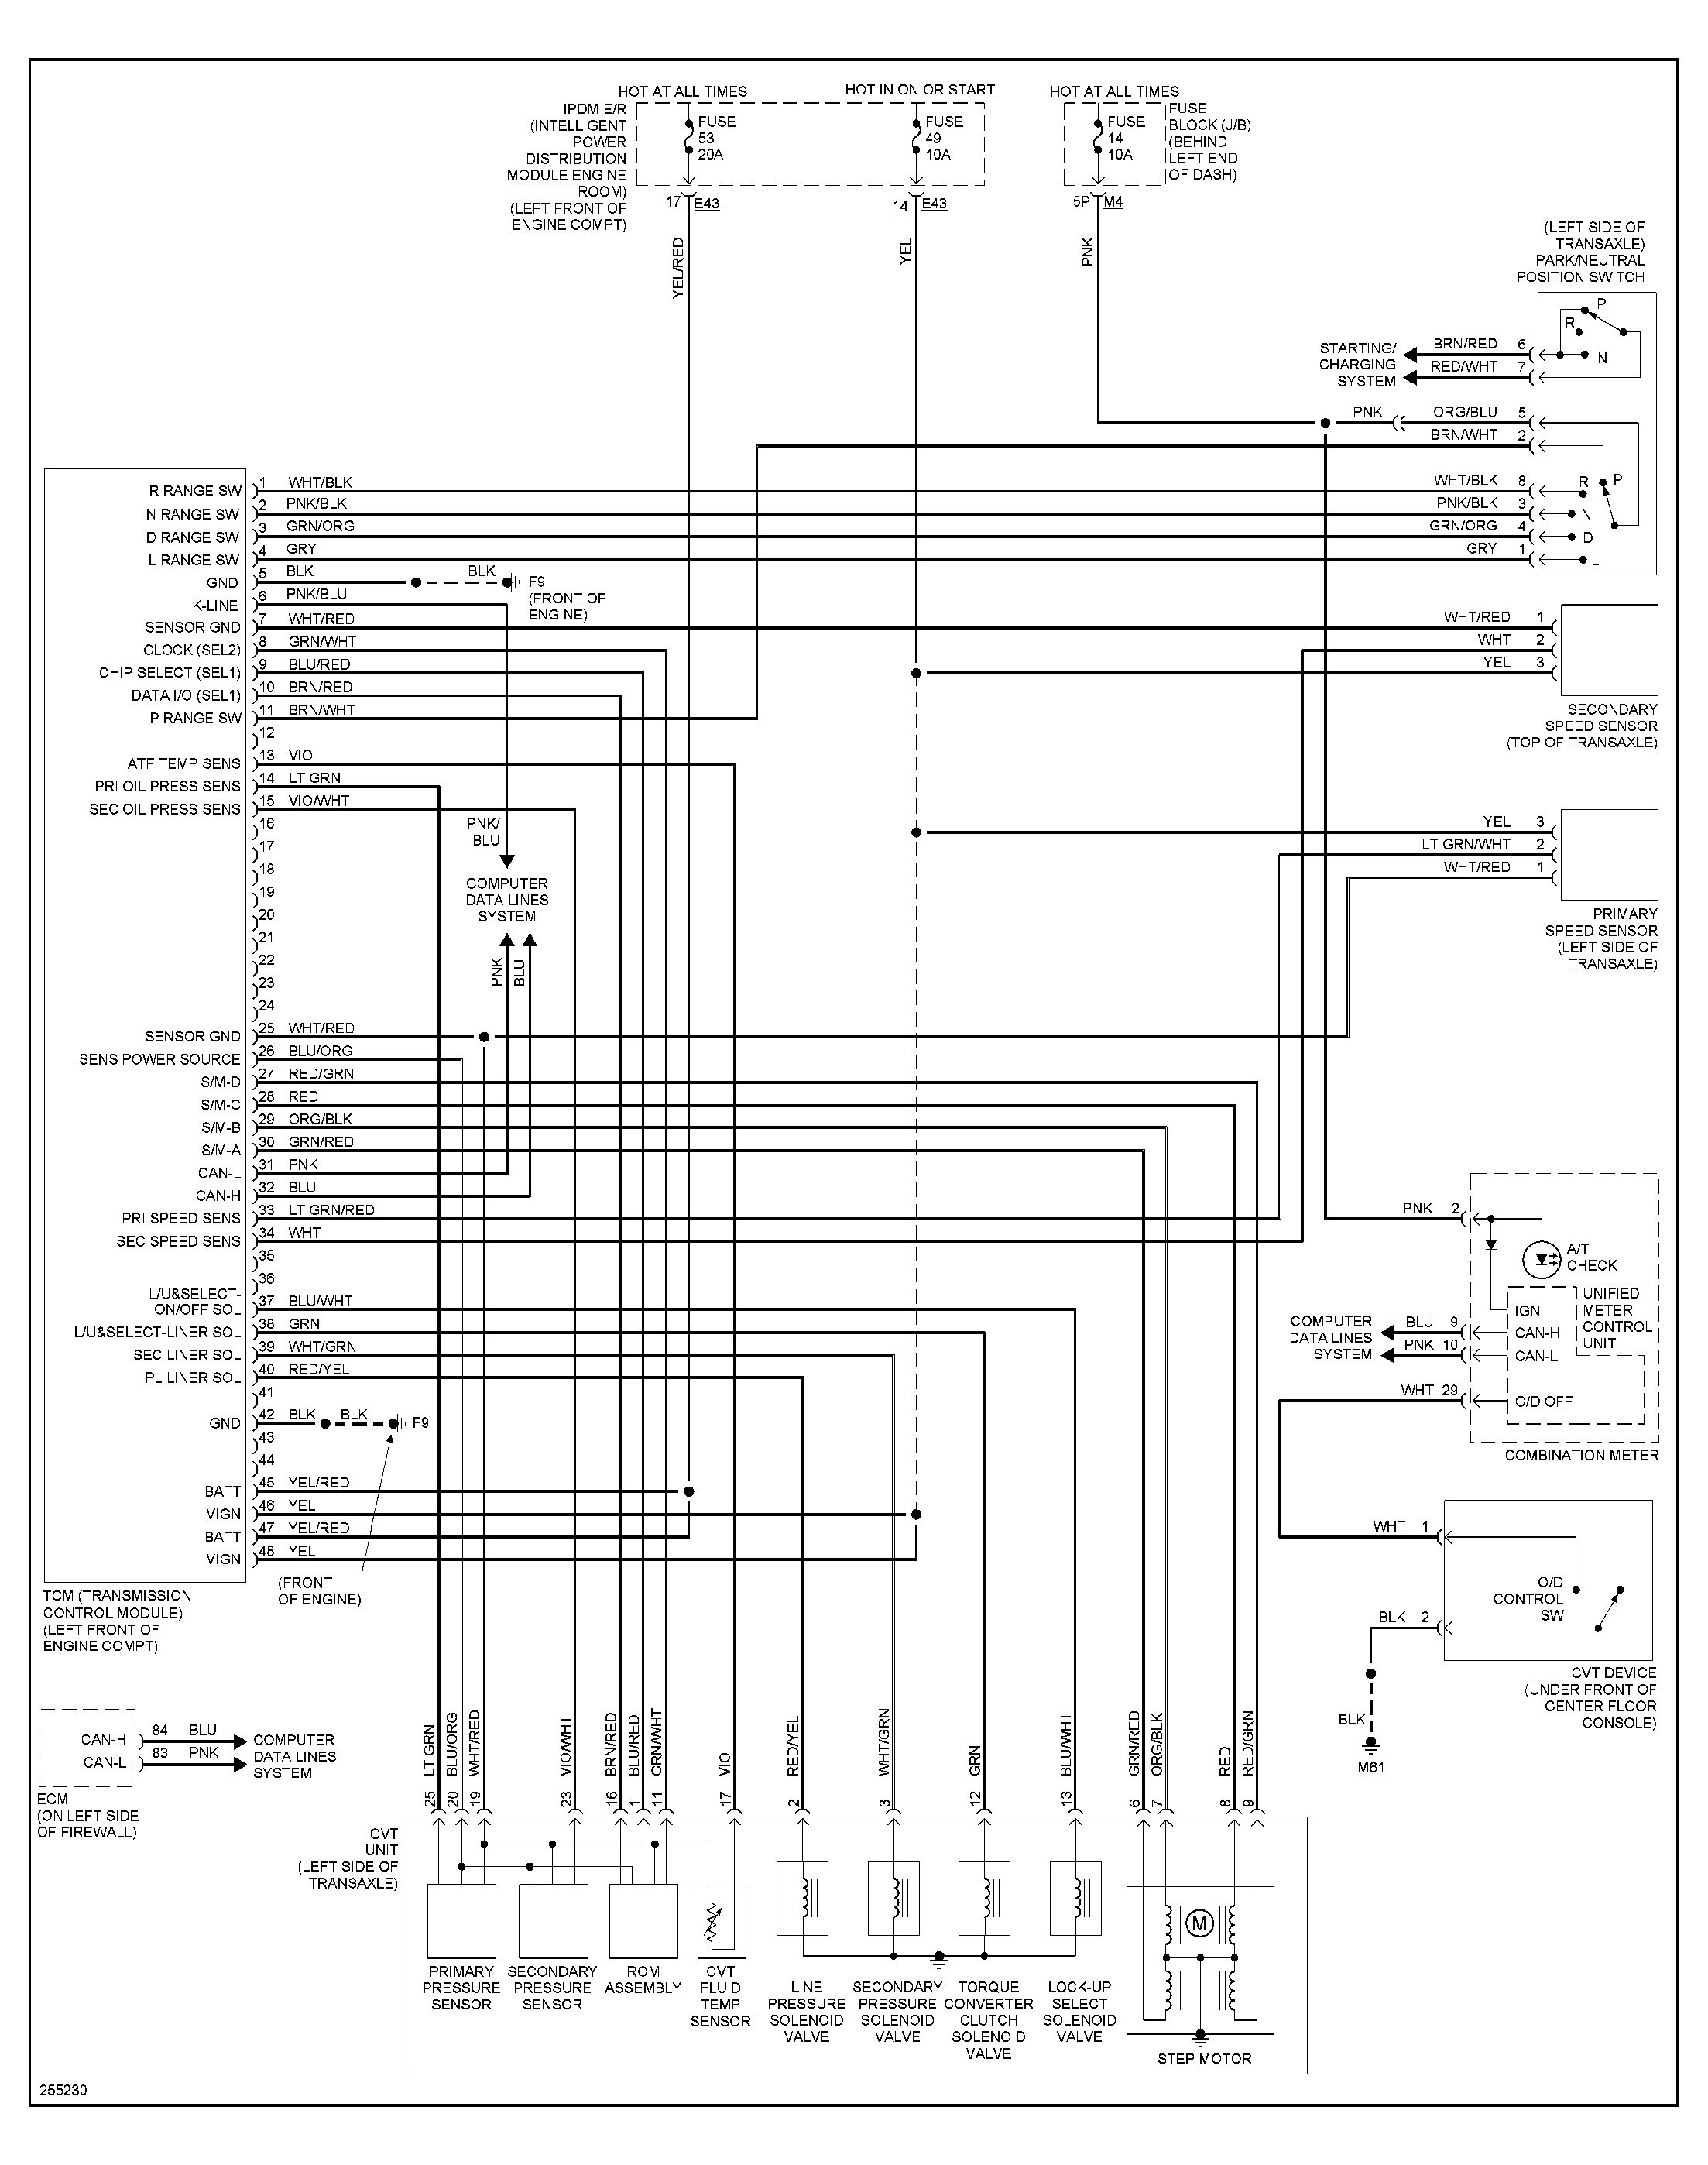 2008 Nissan Sentra Parts Diagram 98 Sentra Engine Diagram Another Blog About Wiring Diagram •